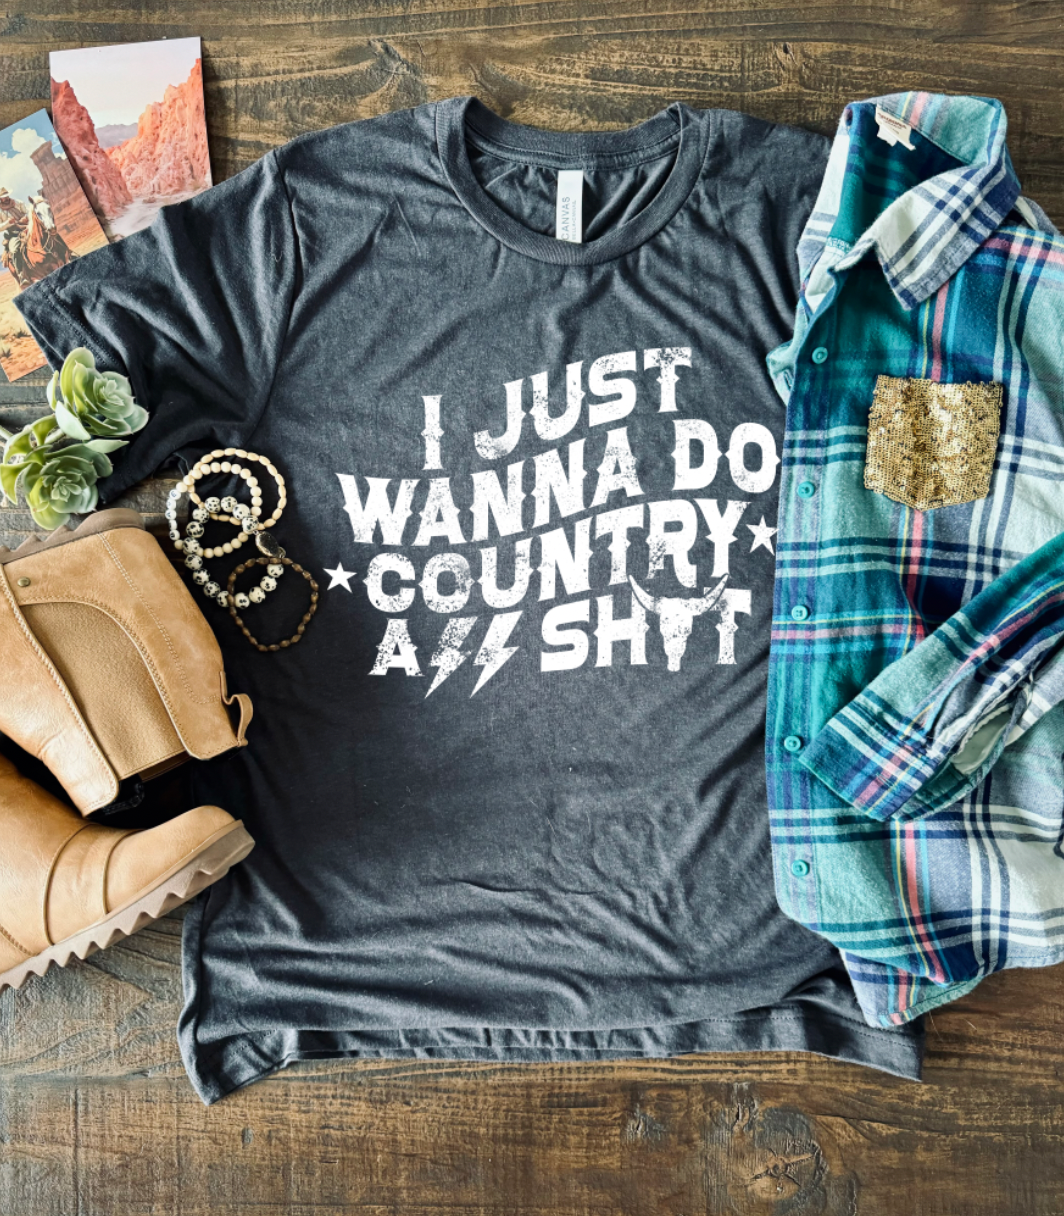 I just wanna do country ass shit, unisex bella and canvas t-shirt featuring stars, lightning bolts and longhorn in charcoal color.